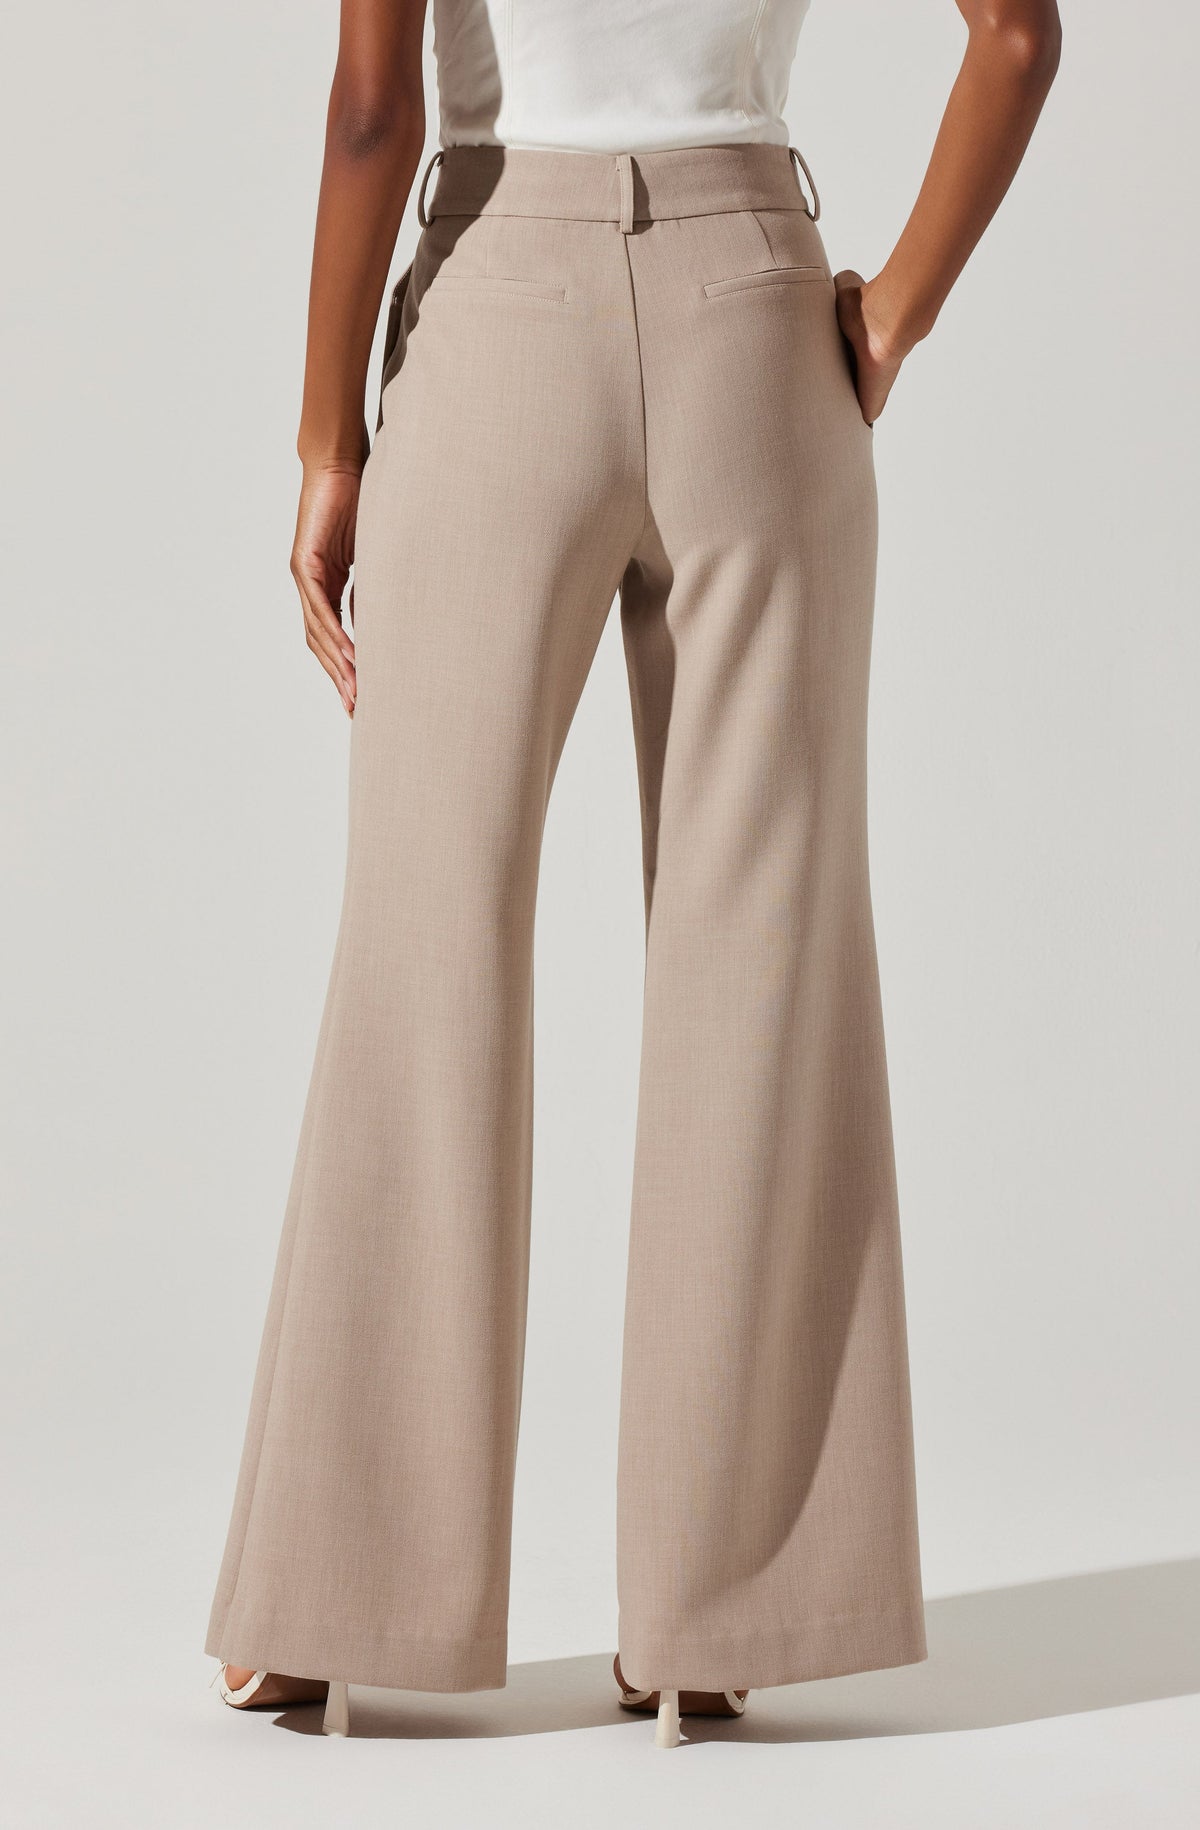 Chaser High Waisted Flare Pants - Taupe / XS